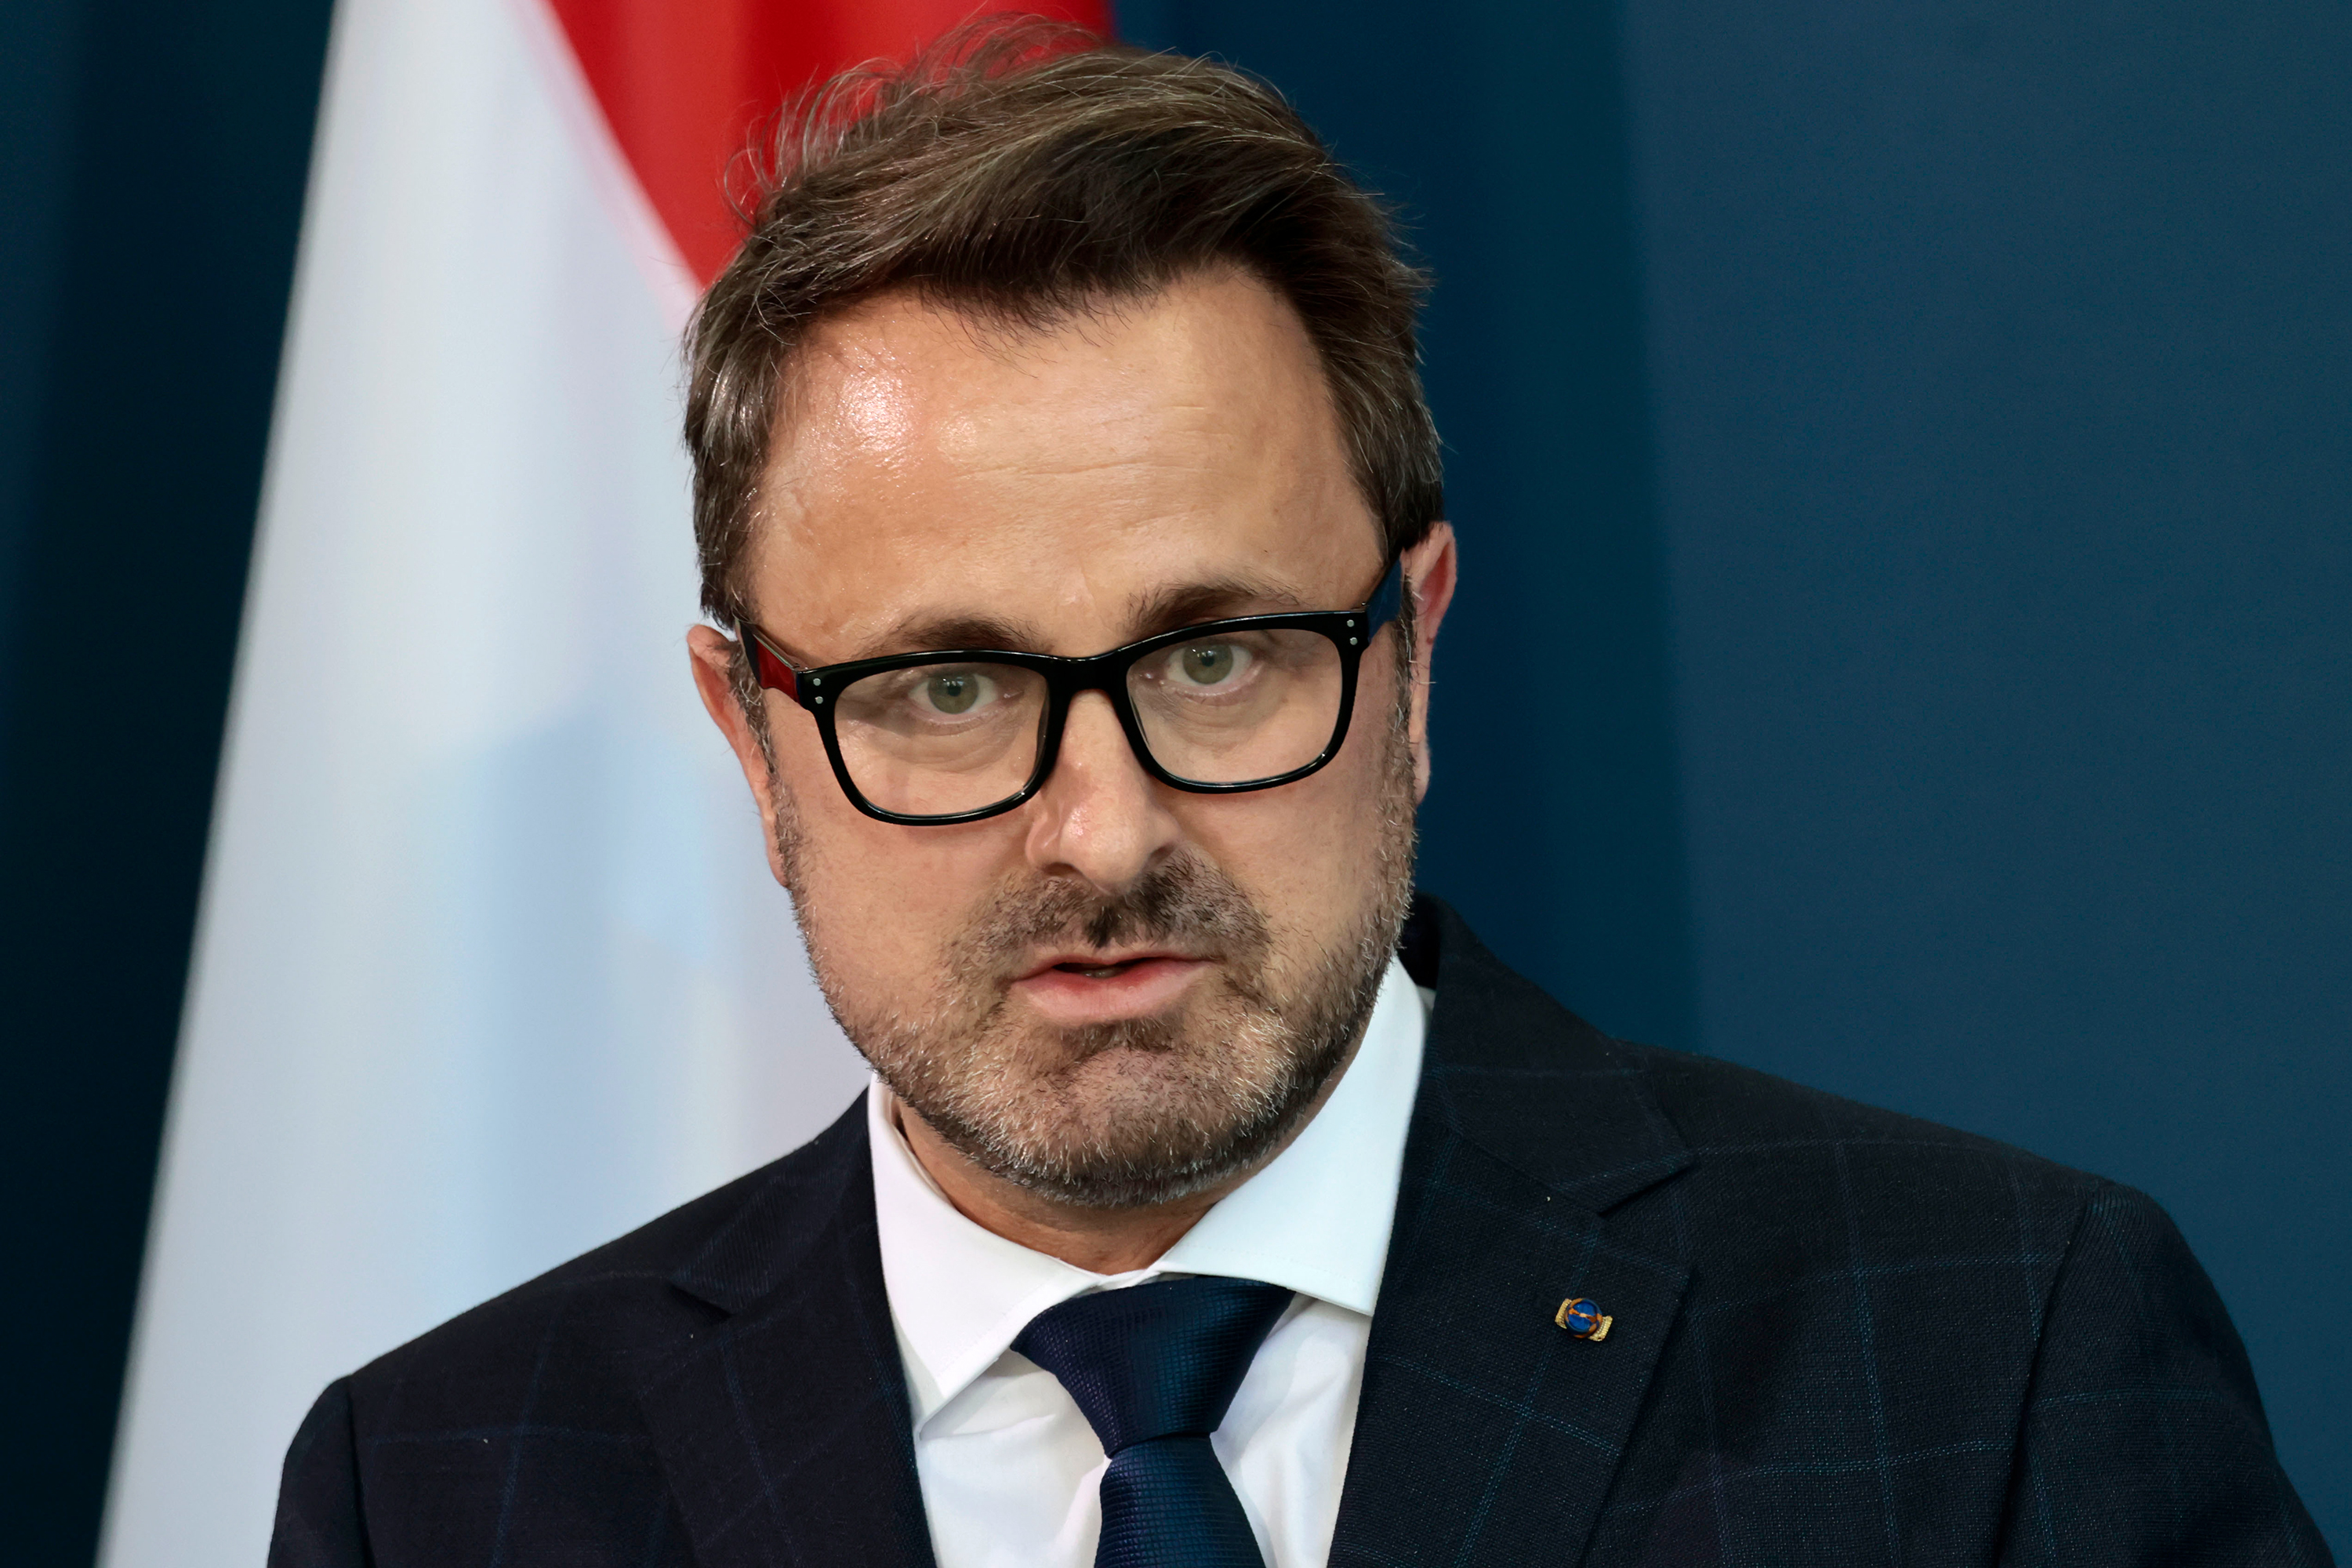 Luxembourg's Prime Minister Xavier Bettel attend a news conference on March 1 in Berlin, Germany. 